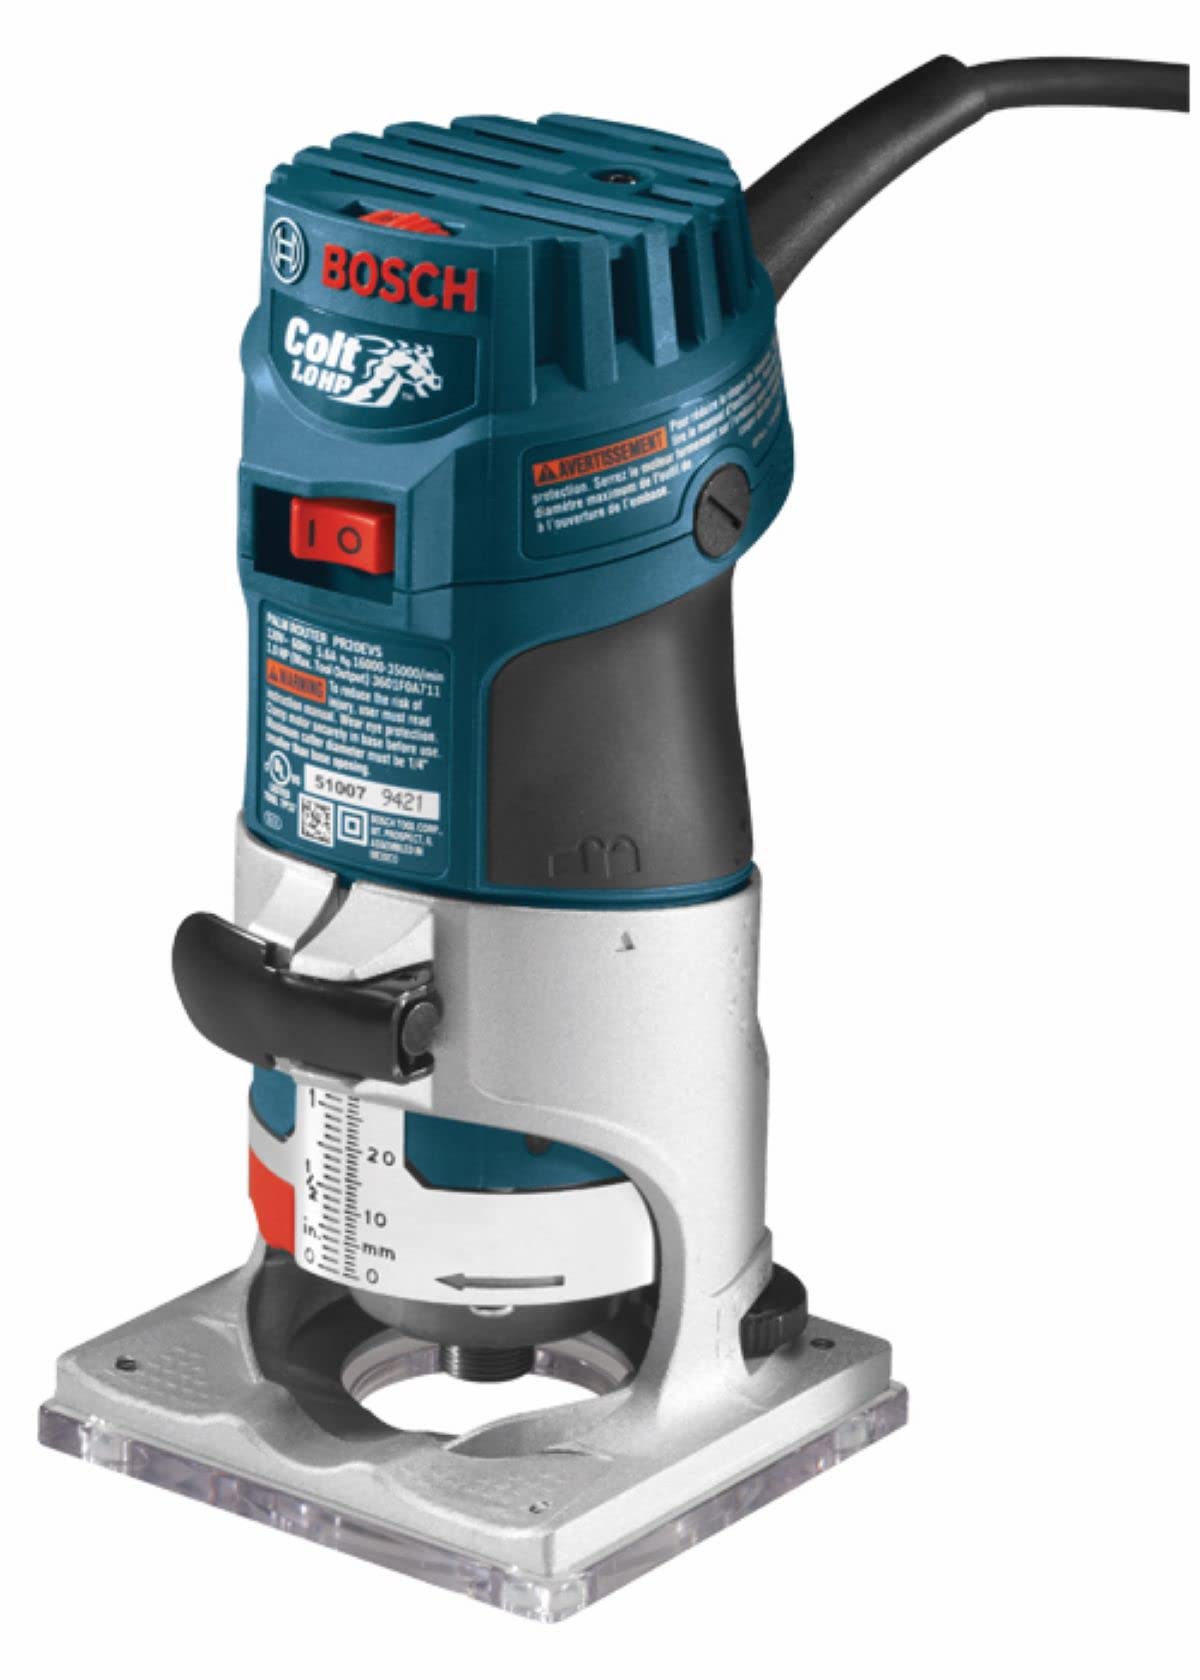 Bosch Router Tool, Colt 1-Horsepower 5.6 Amp Electronic Variable-Speed Palm Router $67.15 + Free Shipping